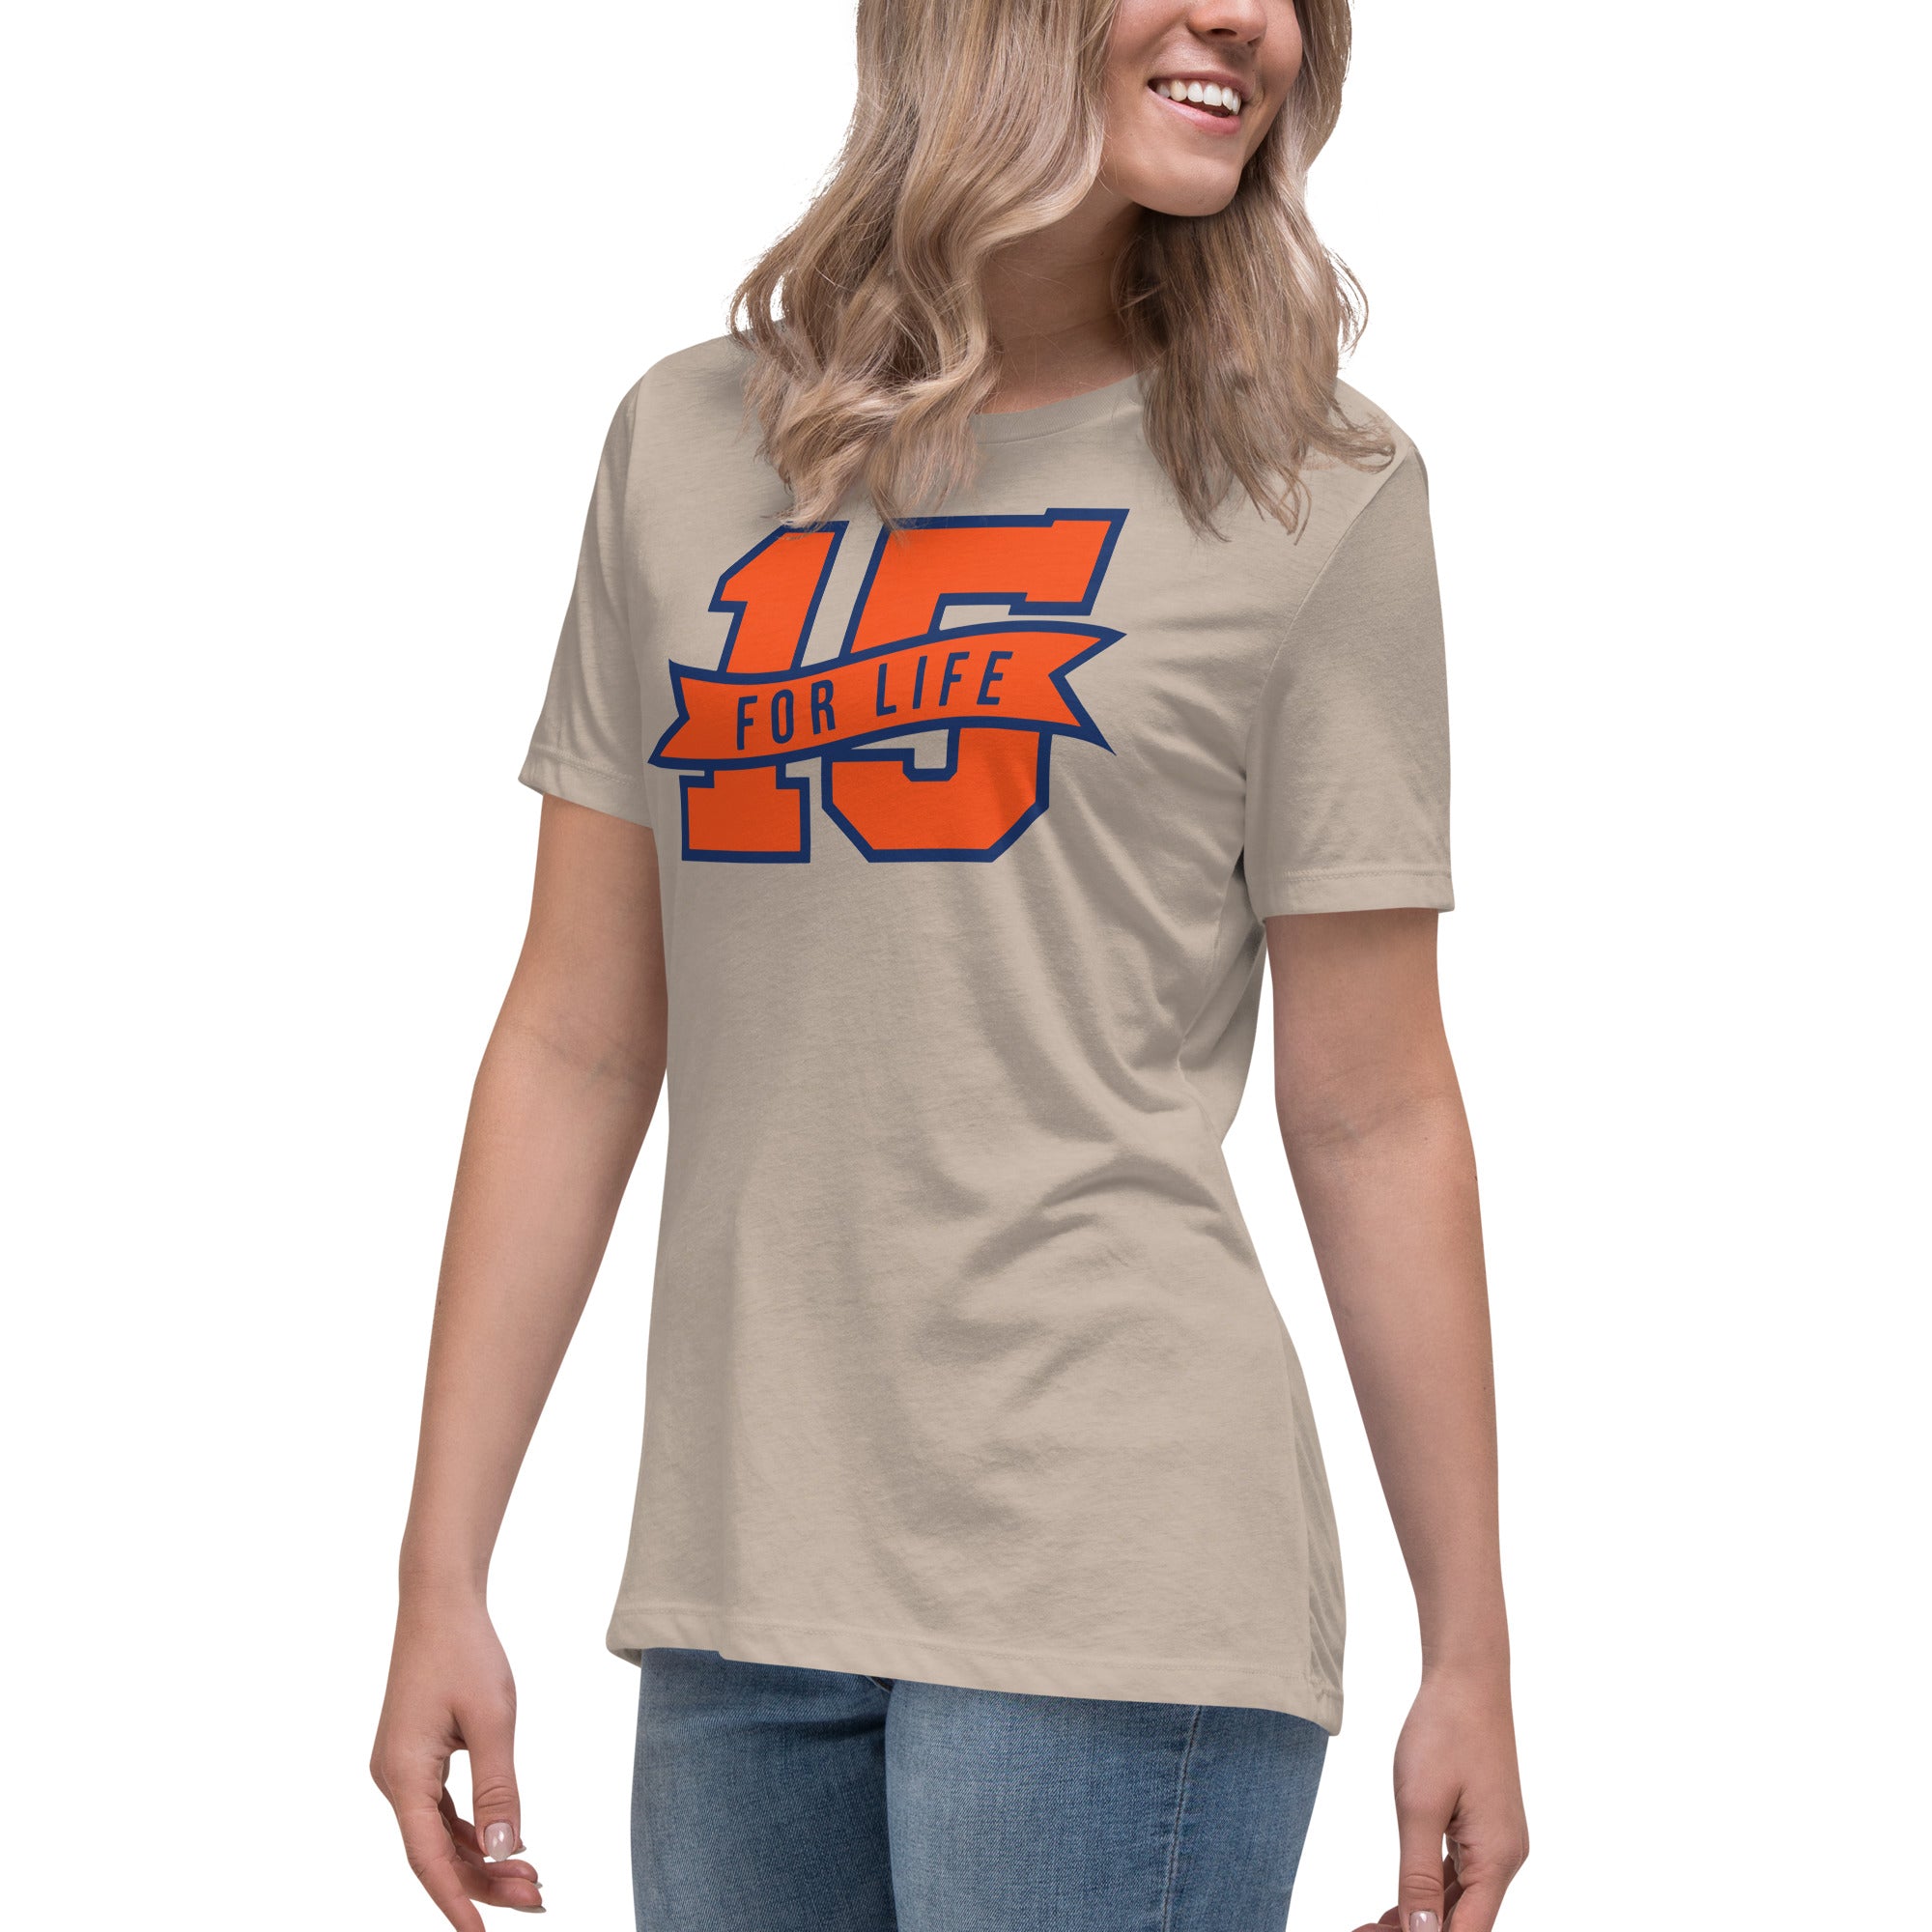 15 For Life Women's Relaxed T-Shirt